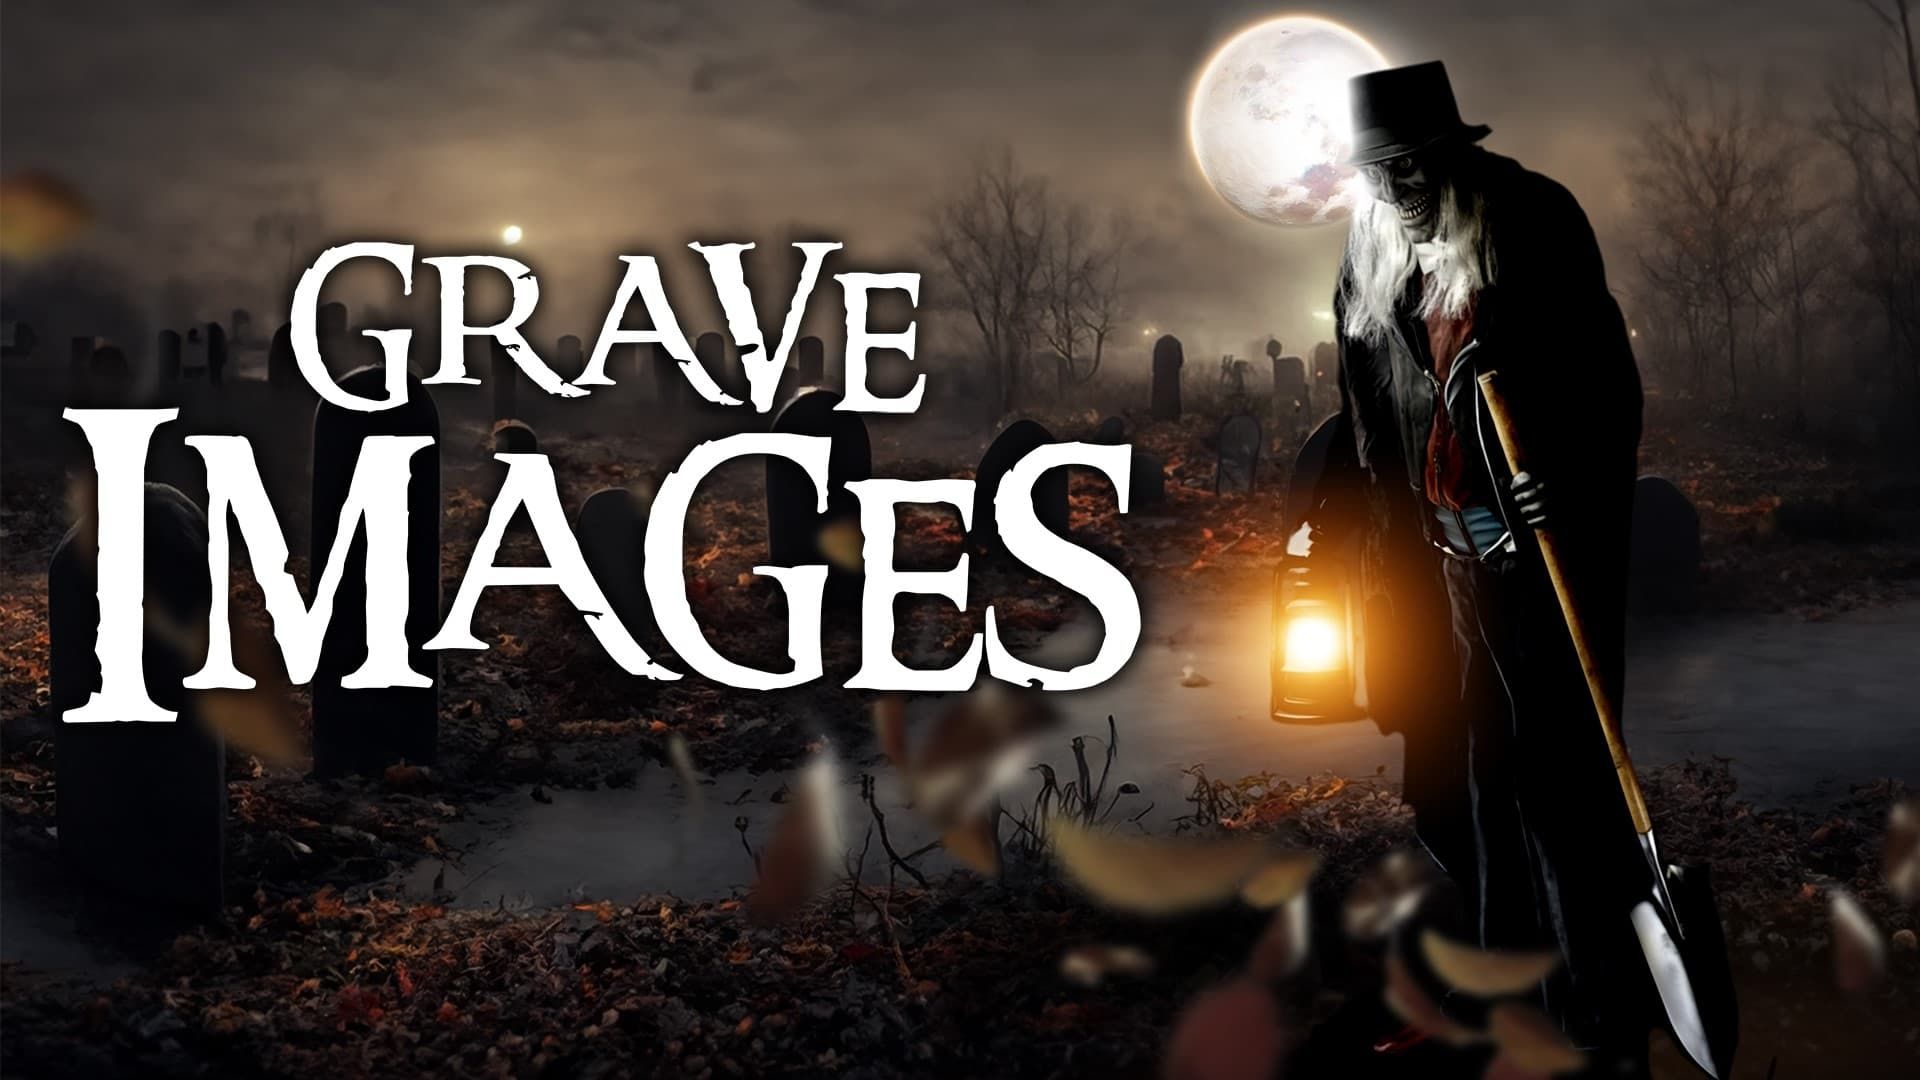 Grave Images background